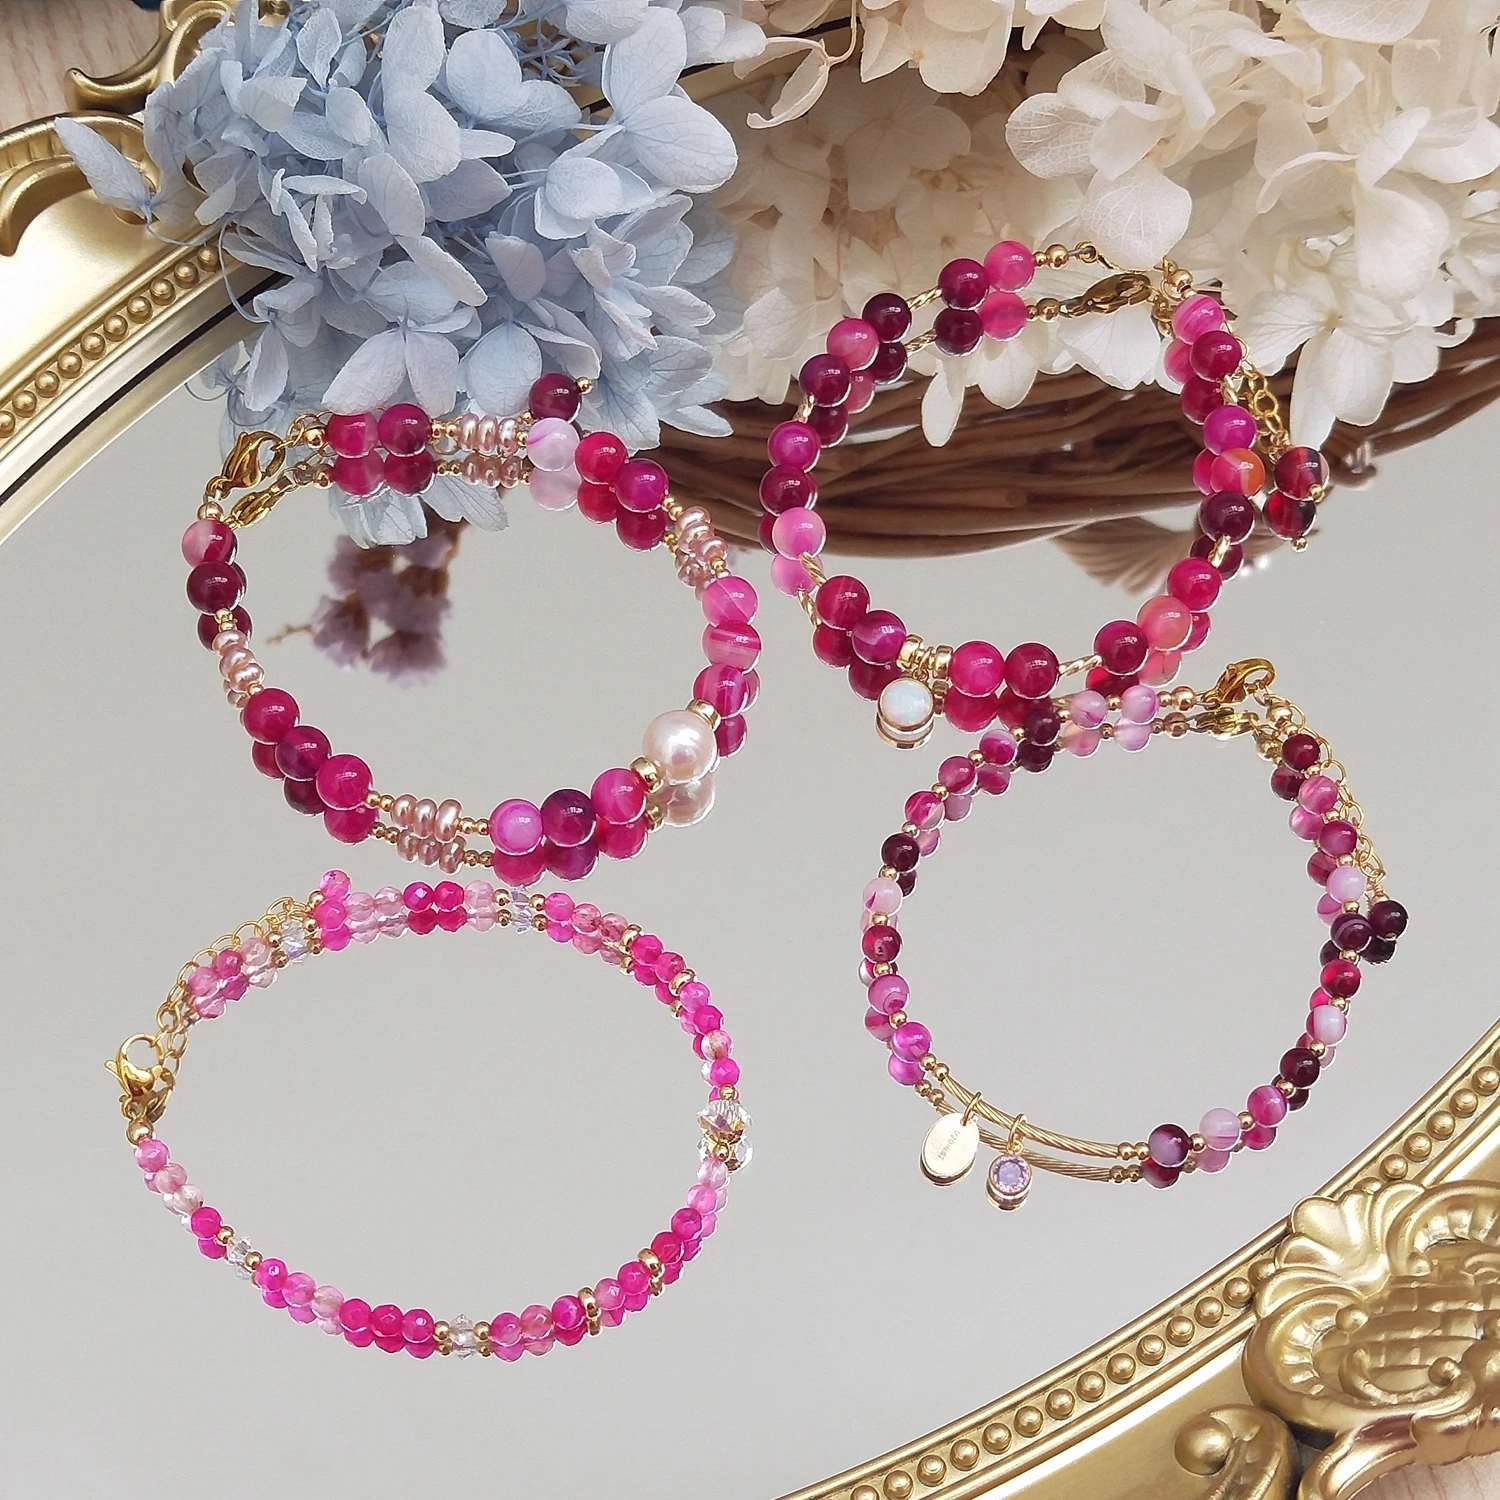 

Lii Ji Dyed Rose Agate 3mm/4mm/6mm Natural Stone 14K Gold Filled Charms Bracelet Handmade Bohe Fashion Jewelry For Female